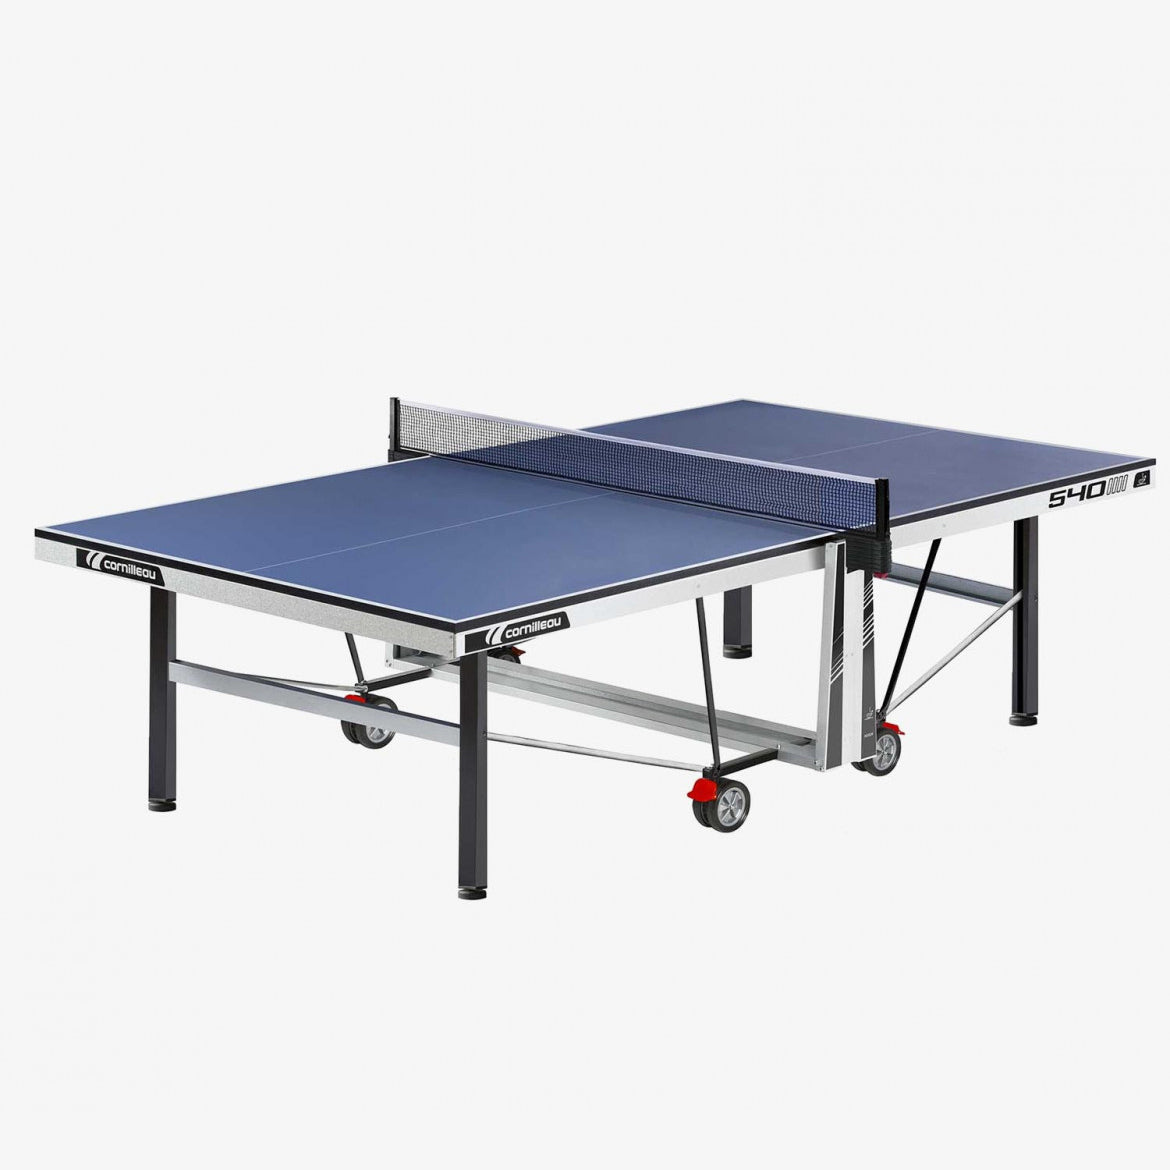 Cornilleau 540 Competition Indoor Table Tennis Table